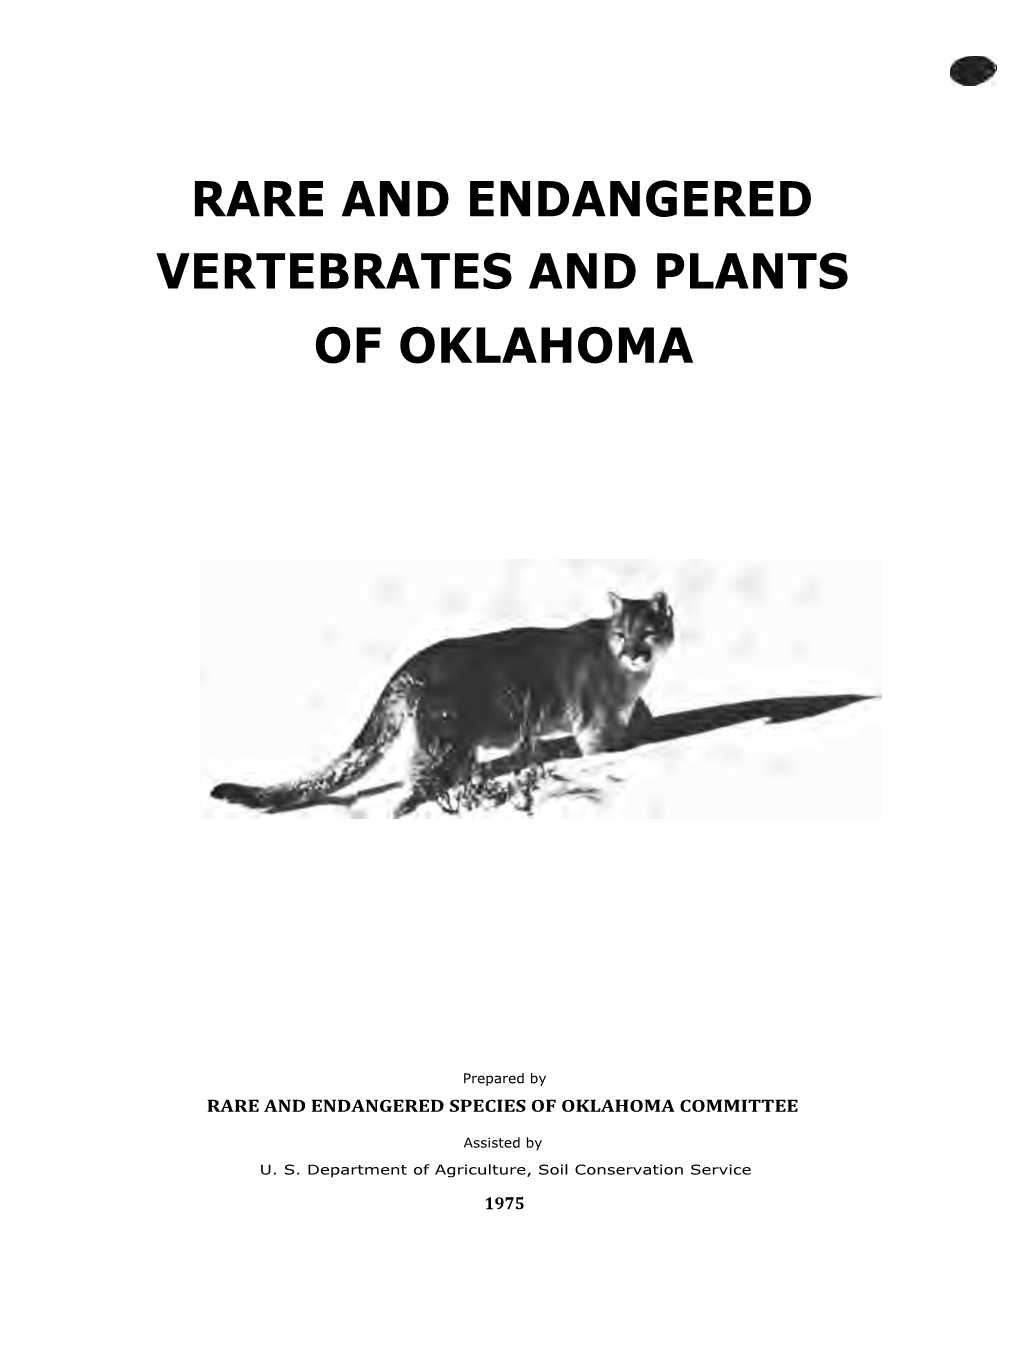 Rare and Endangered Vertebrates and Plants of Oklahoma